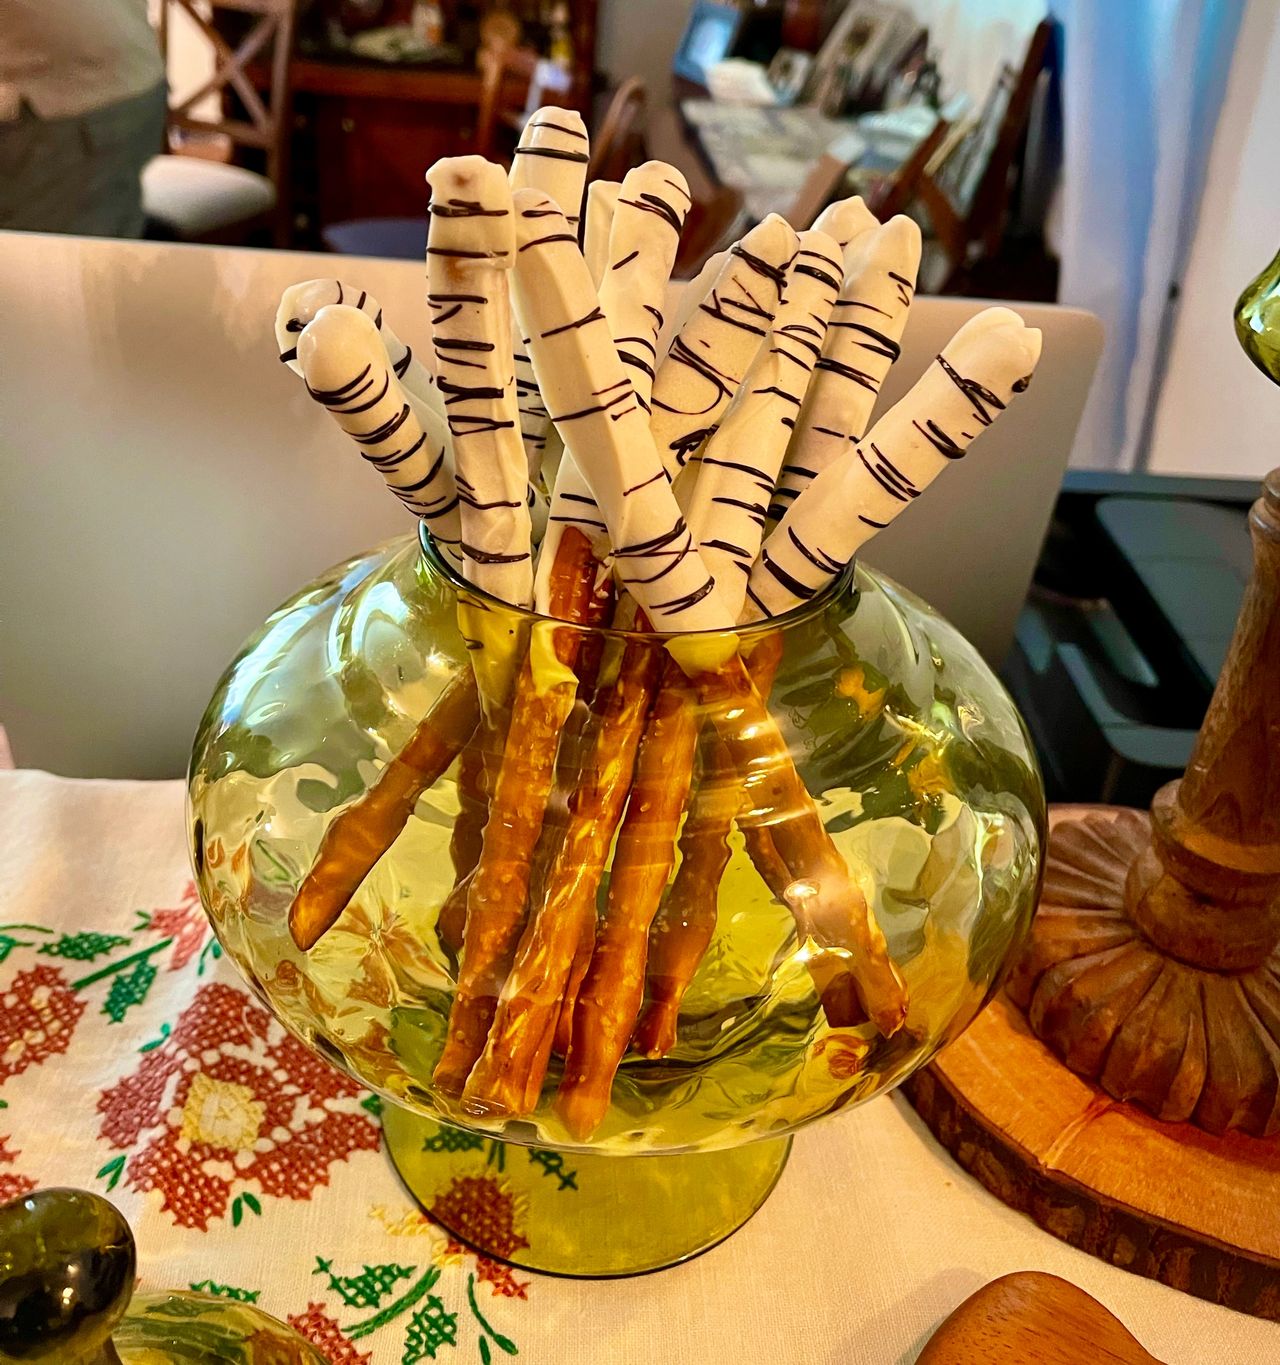 Pretzel sticks decorated to look like moss and birch bark were easy and fun.